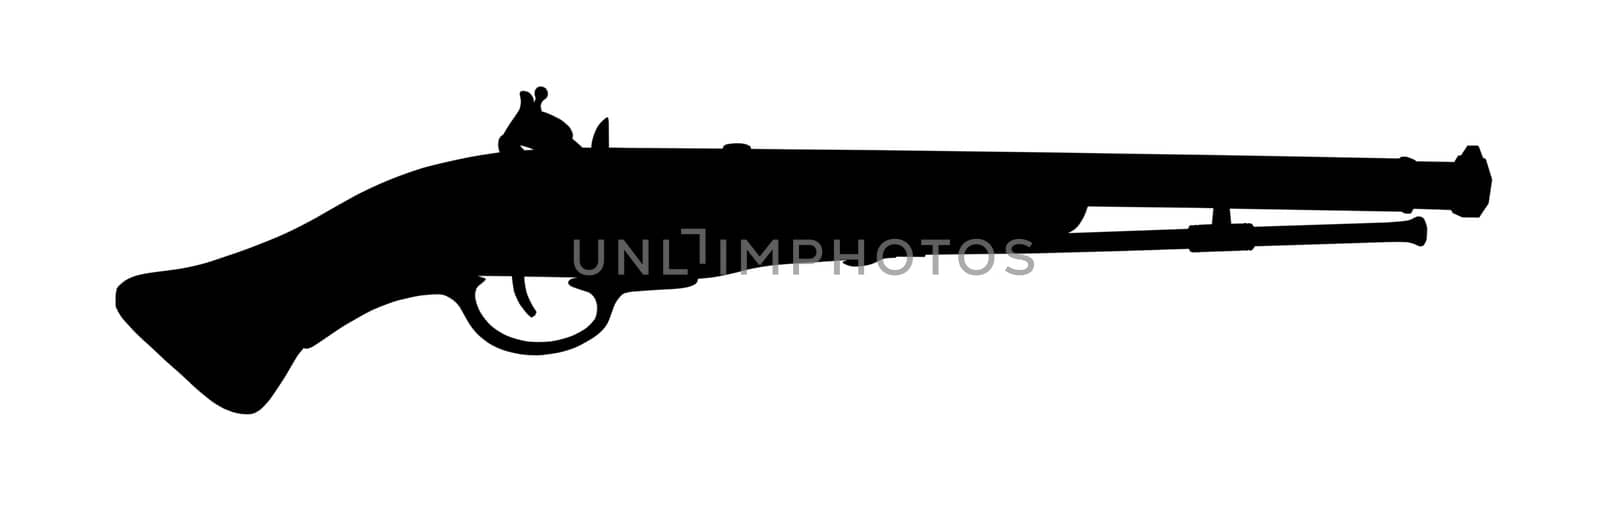 silhouette Model of the old gun on the white background, souvenir